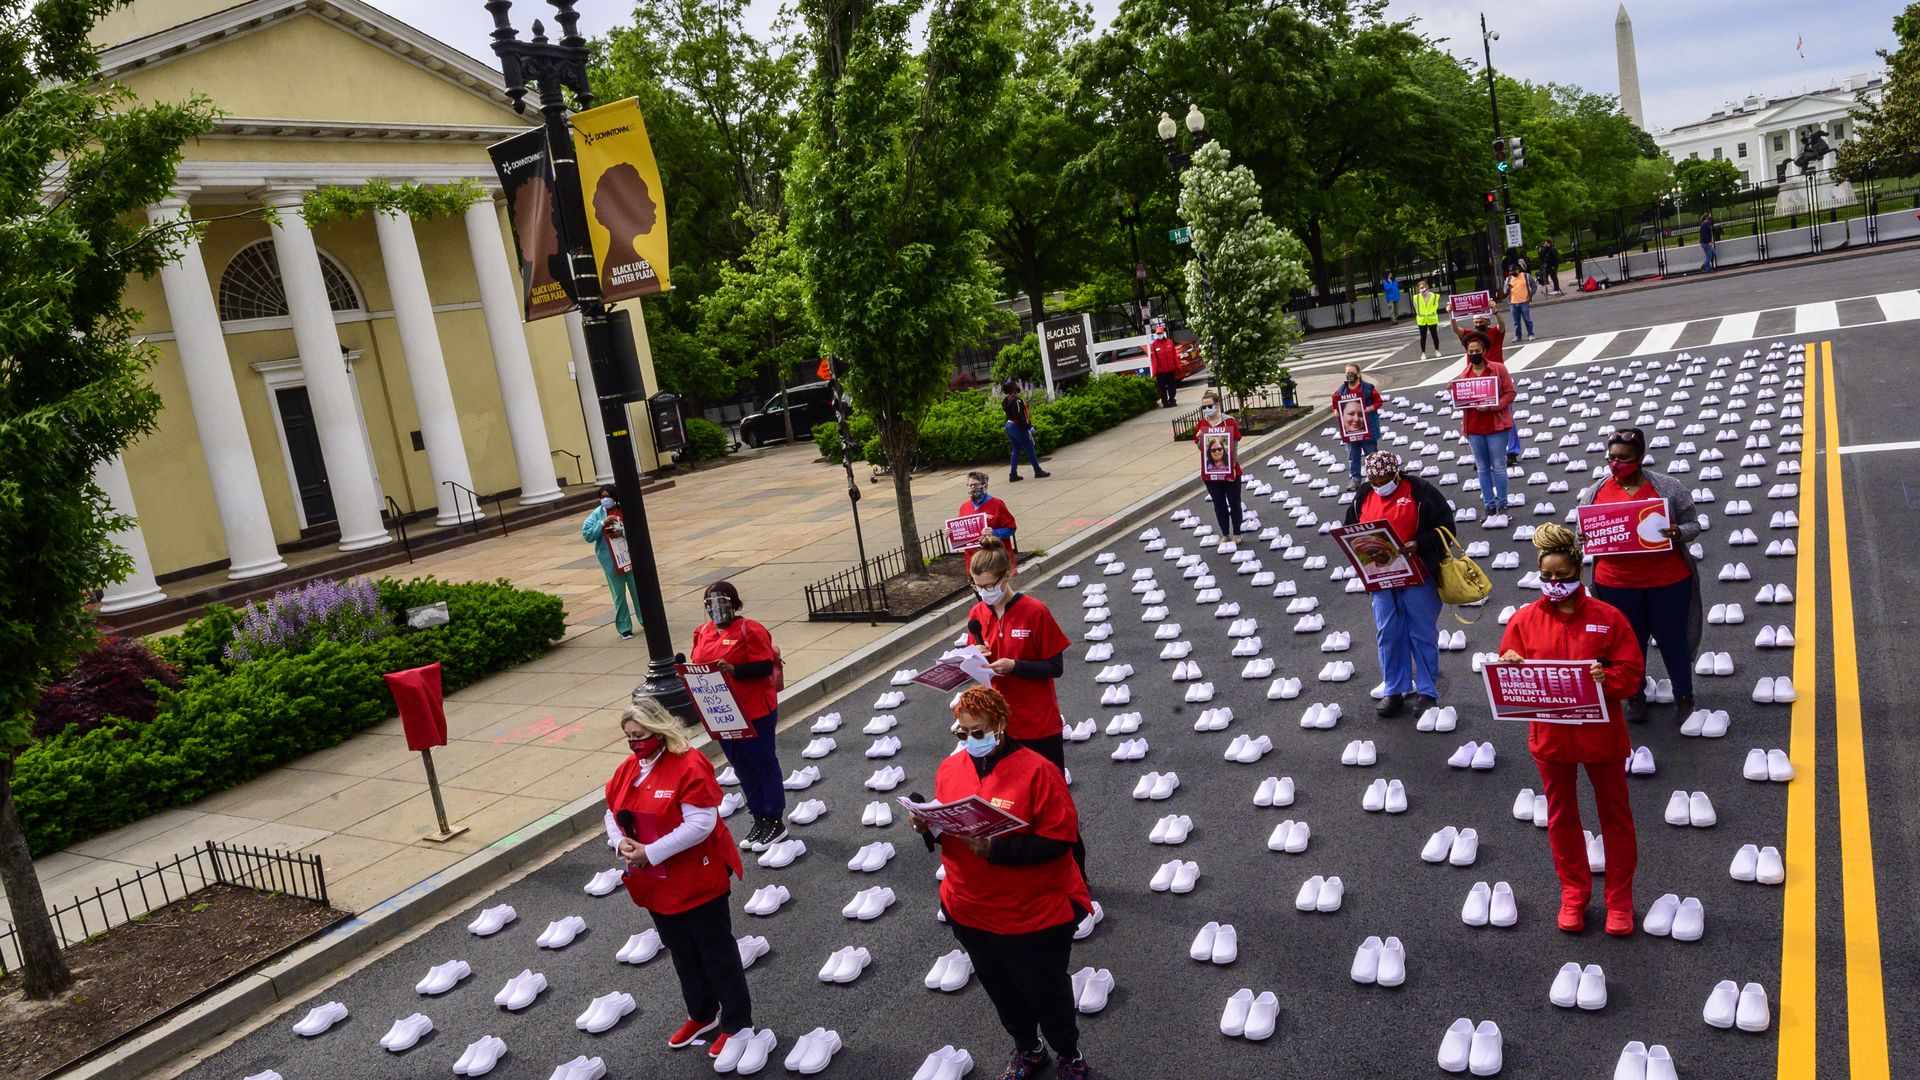 Members of the National Nurses United place 400 pairs of shoesto recognize the more than 400 registered nurses who have died from the Covid-19 pandemic on May 12, 2021 in Washington, DC